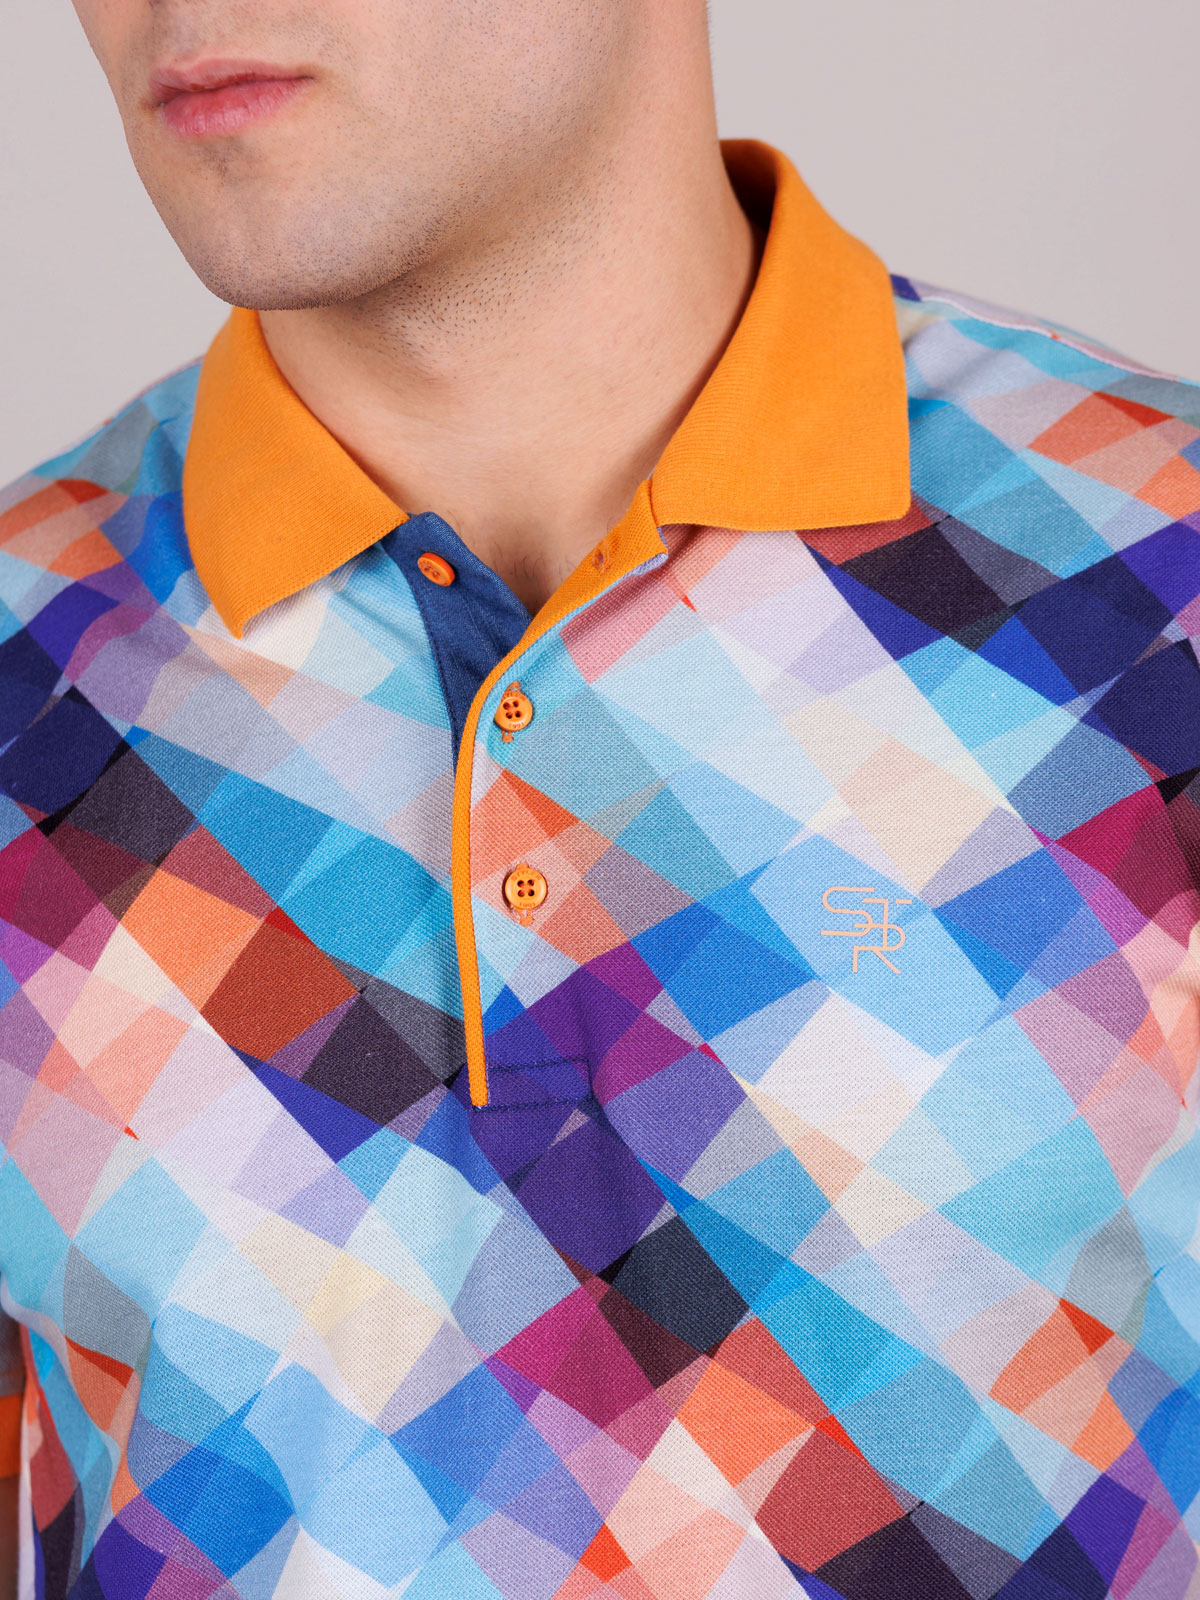 Tshirt with multicolored squares - 93428 € 40.49 img3